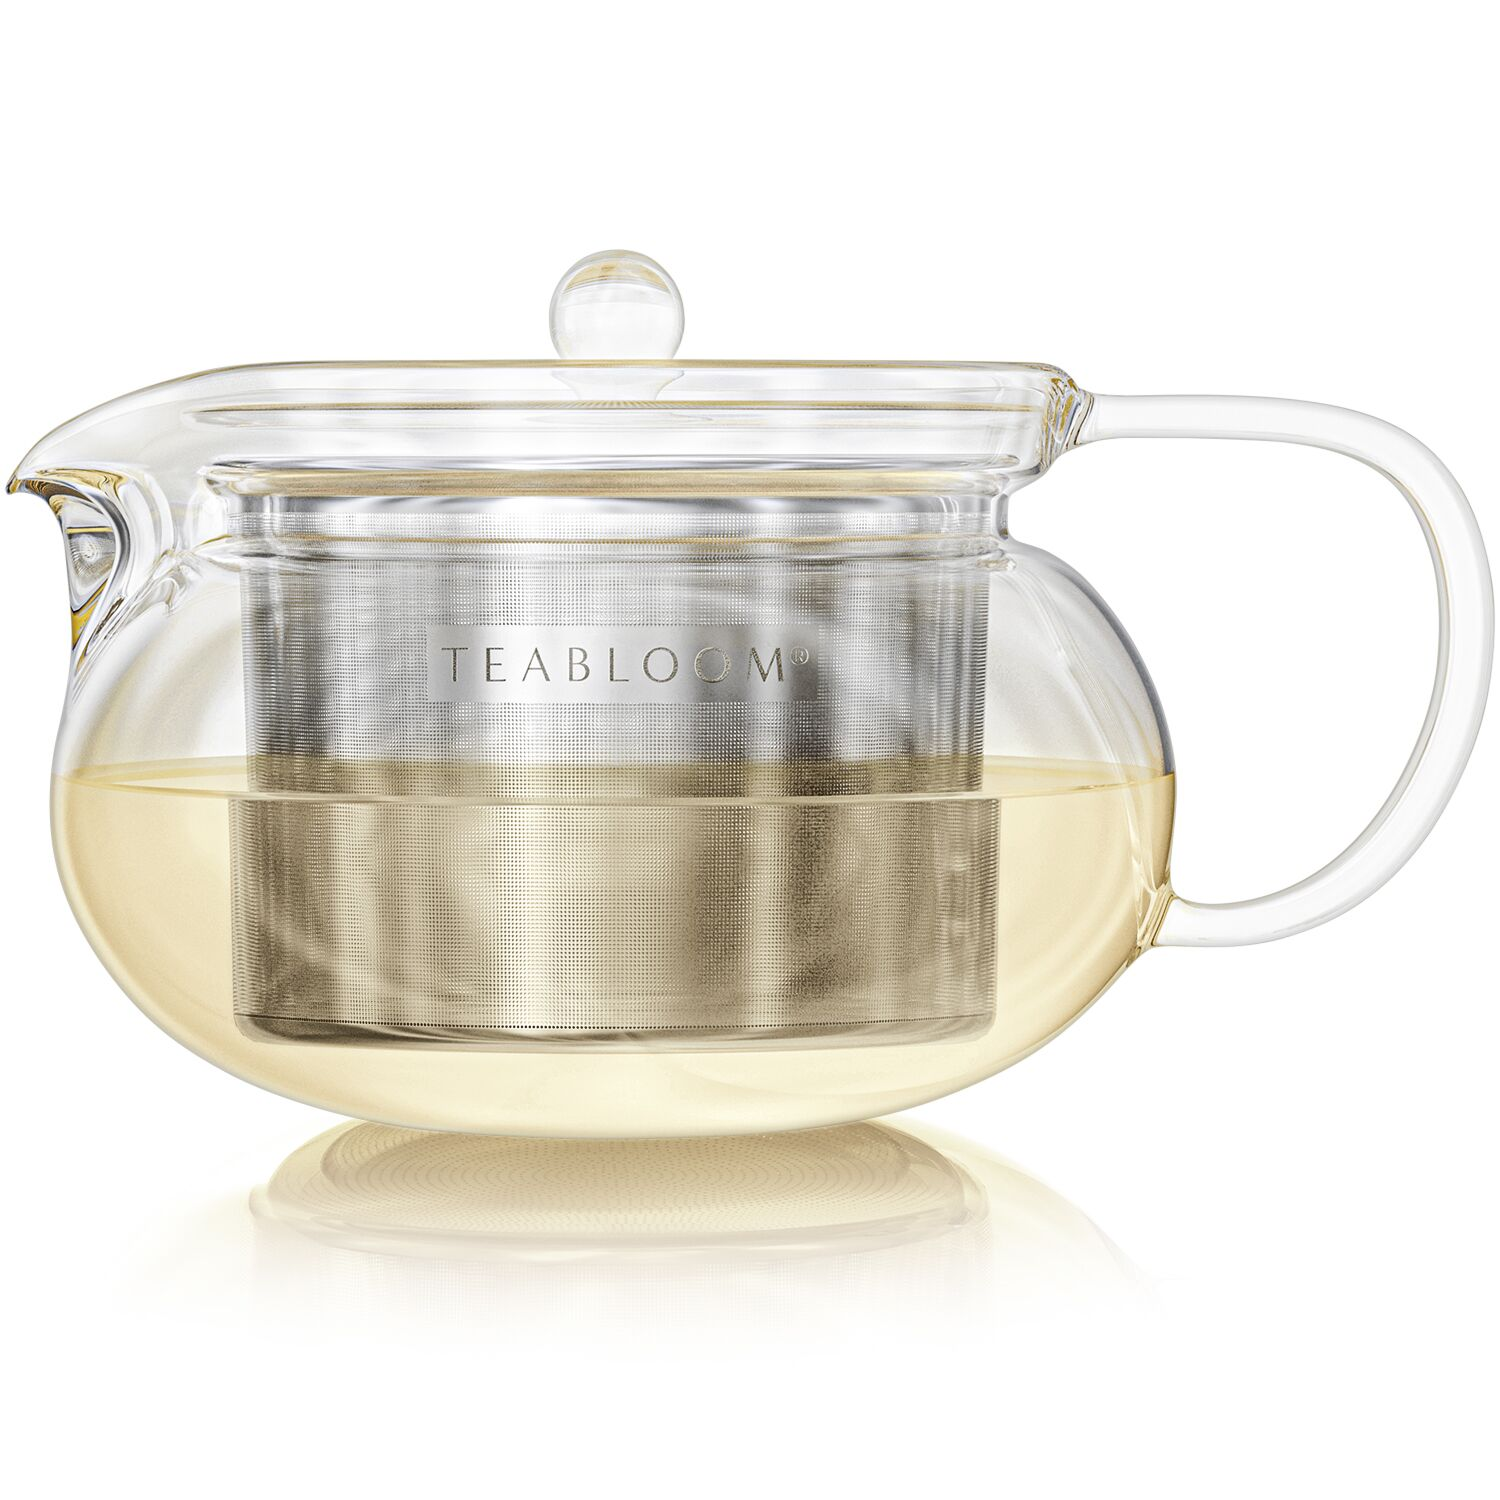 Teabloom Kyoto Glass Teapot with a Removable Infuser tea accessory